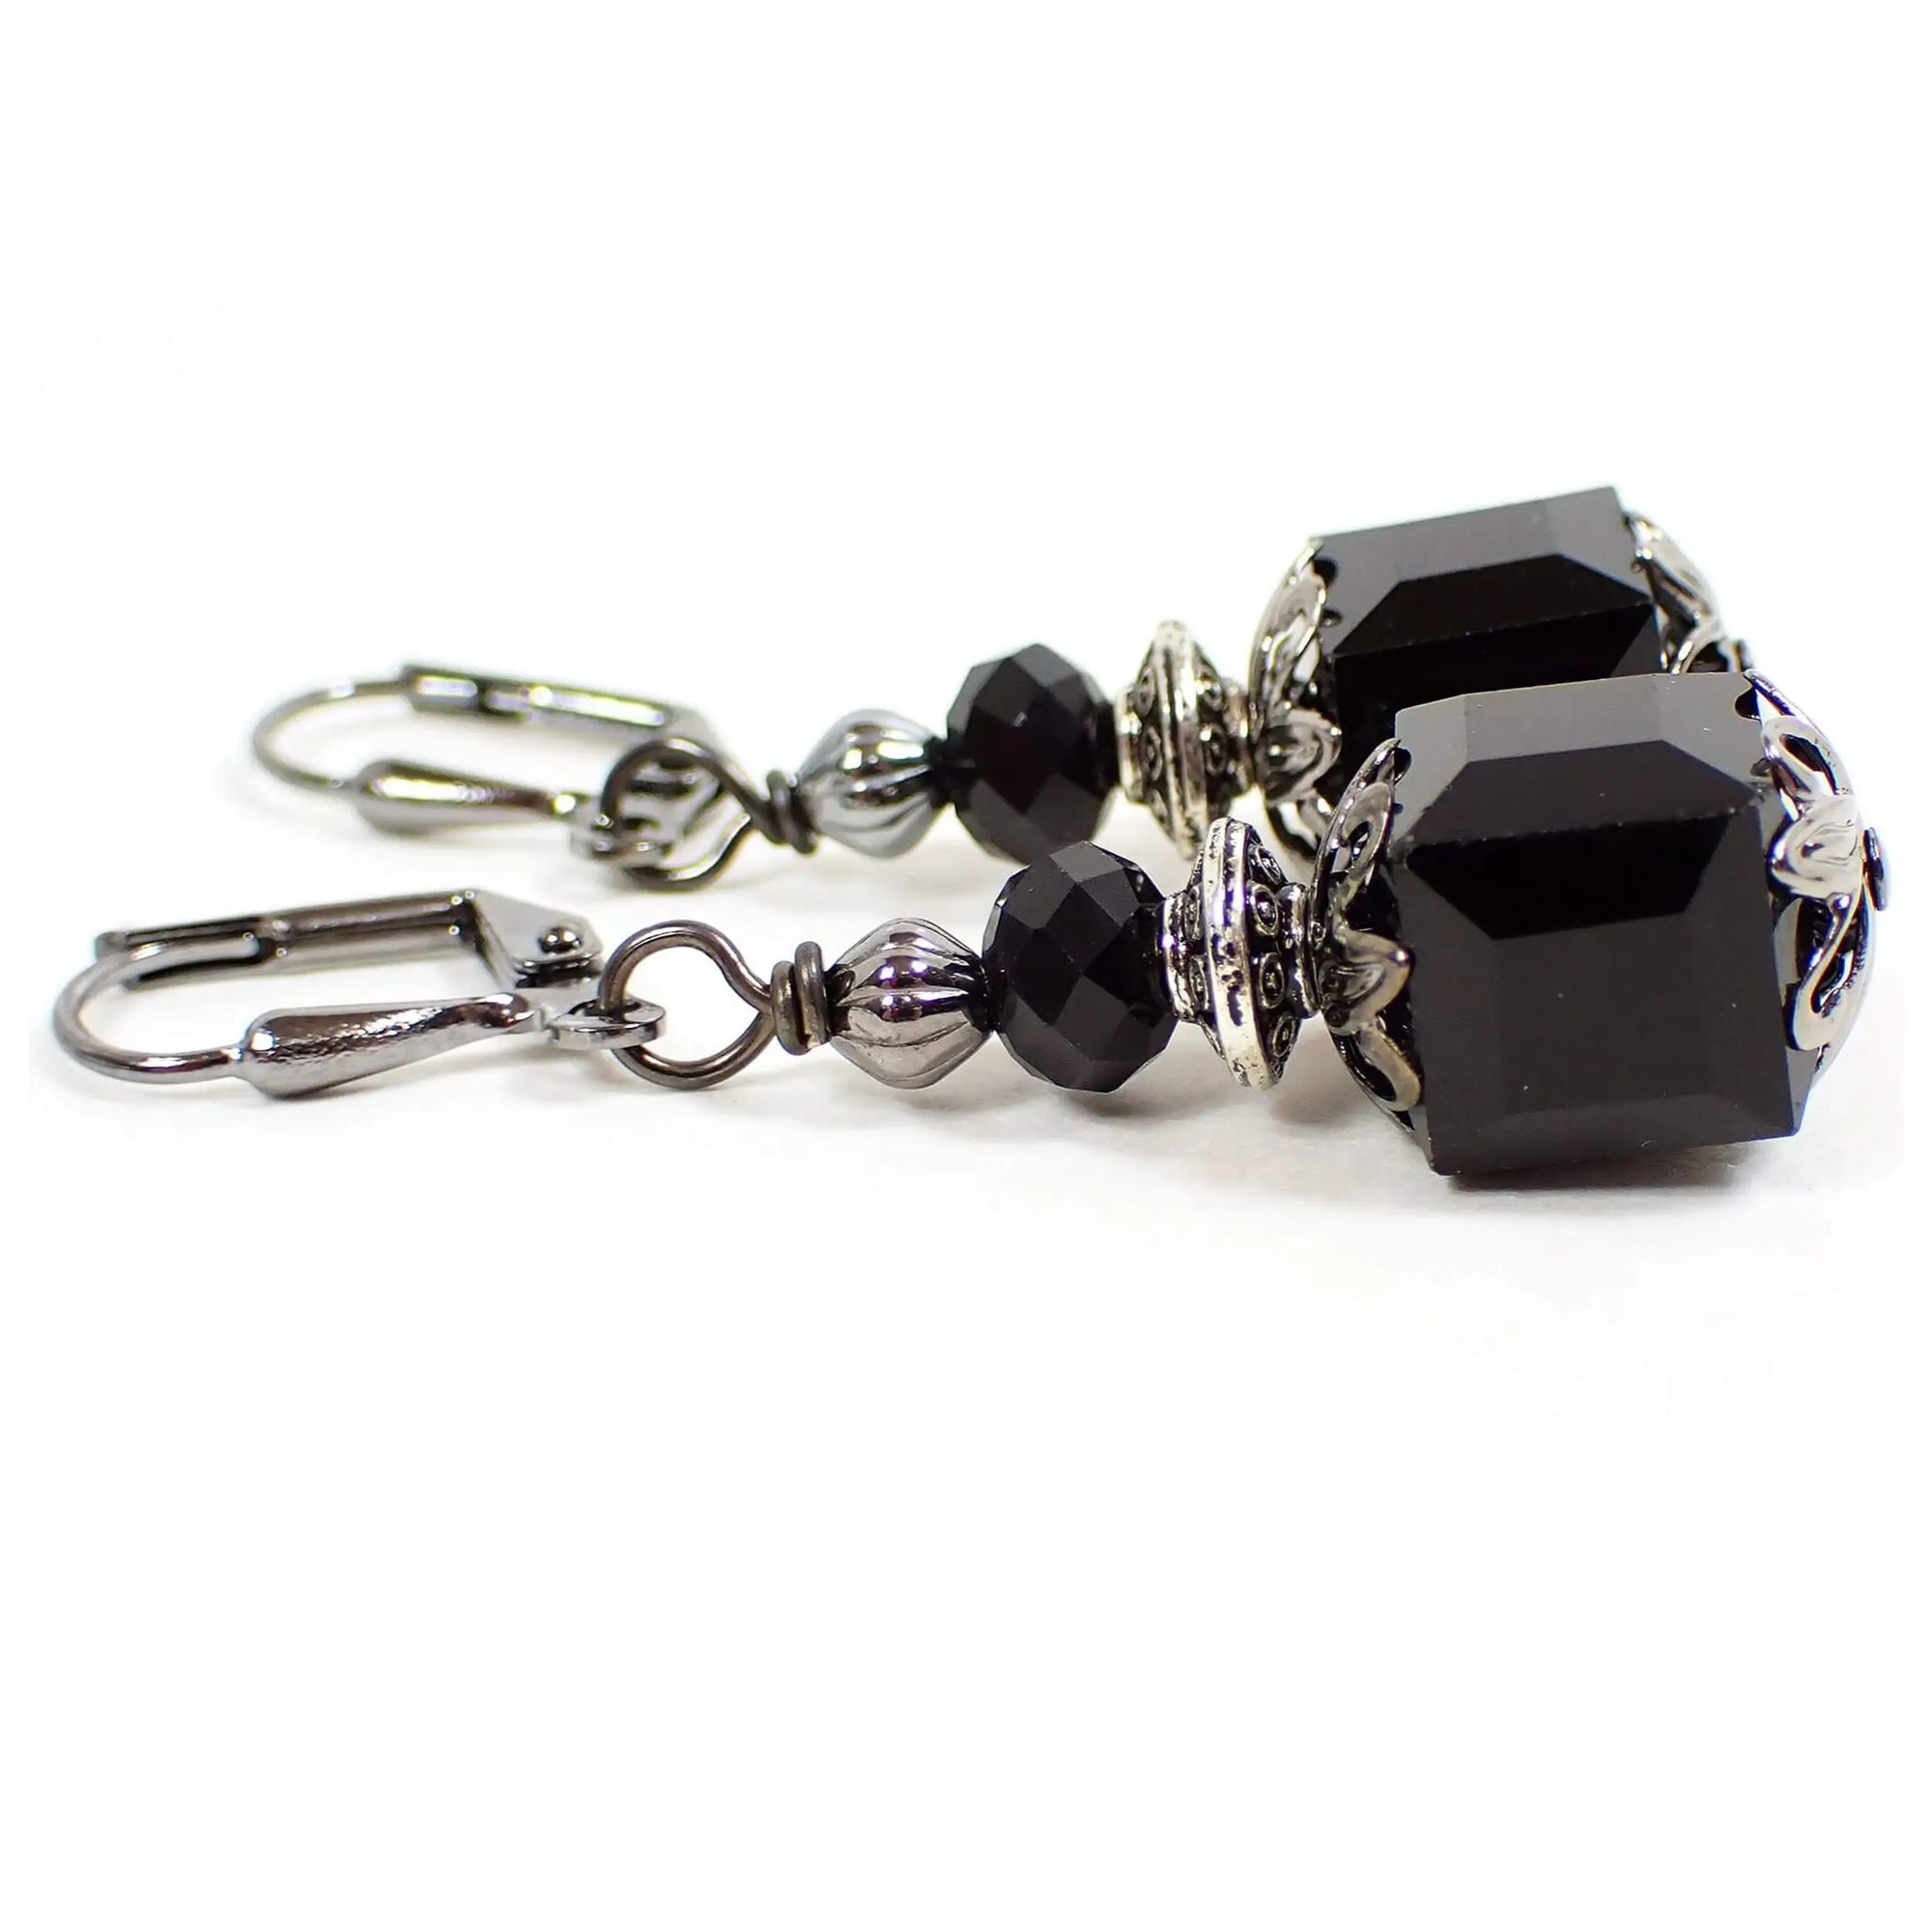 Side view of the handmade cube earrings. The metal is gunmetal gray in color. There are black faceted rondelle glass crystal beads at the top and black faceted glass crystal cube beads at the bottom.